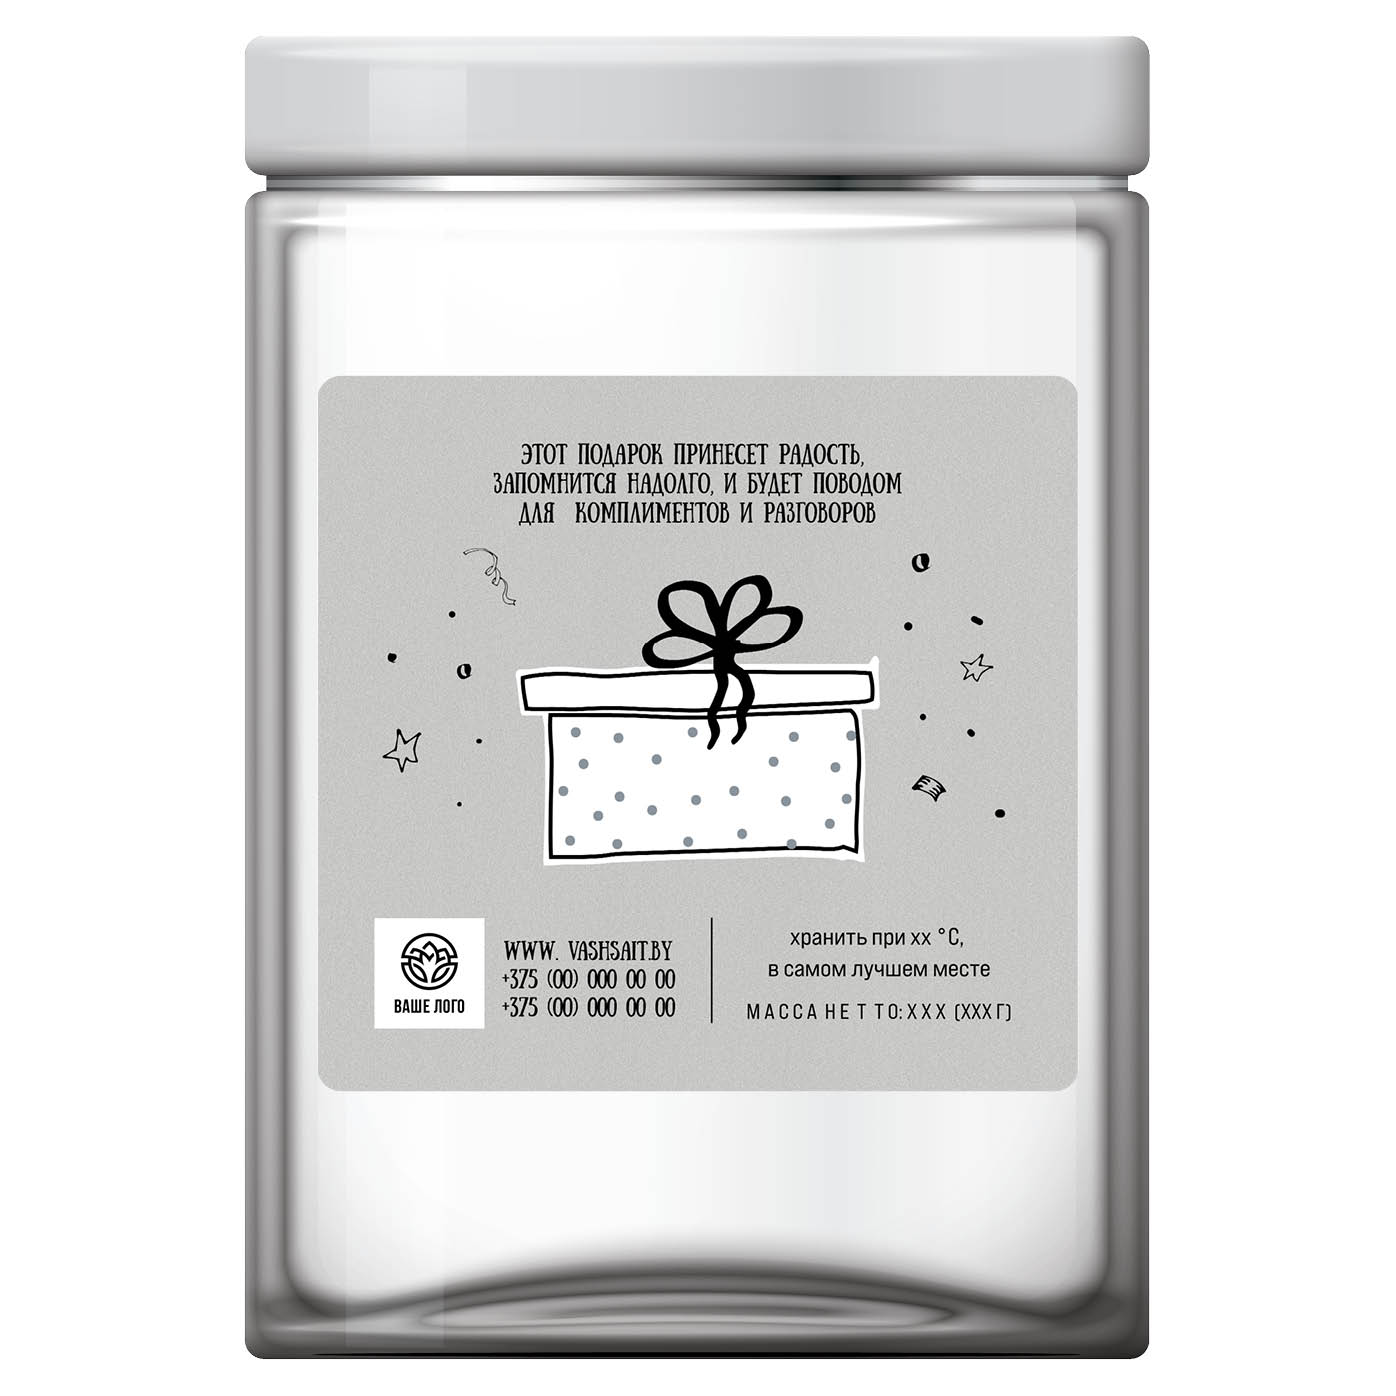 Stickers, labels on cans, candles A gift on a gray background